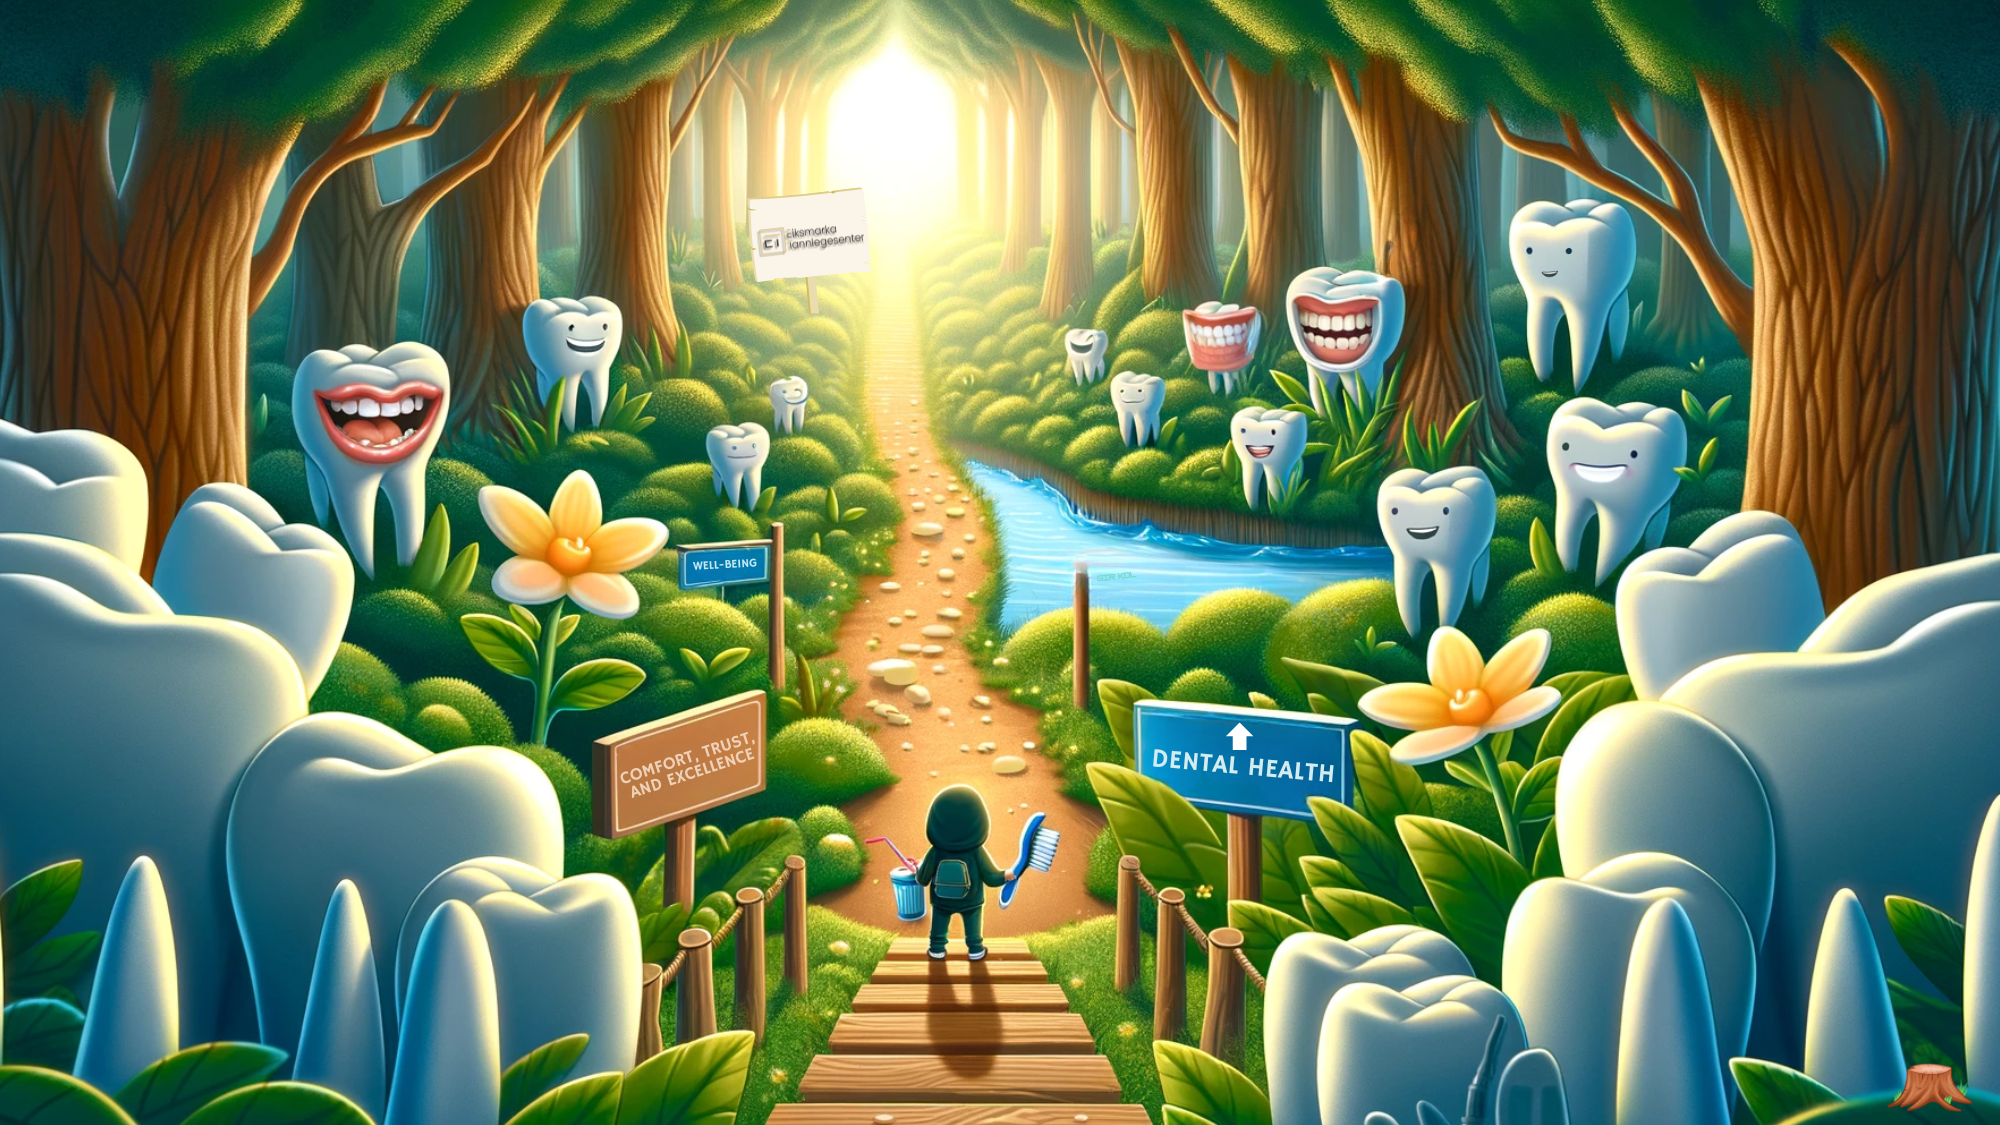 "Metaphorical path from dark forest to bright dental clinic, with tooth-shaped flora and health signs."